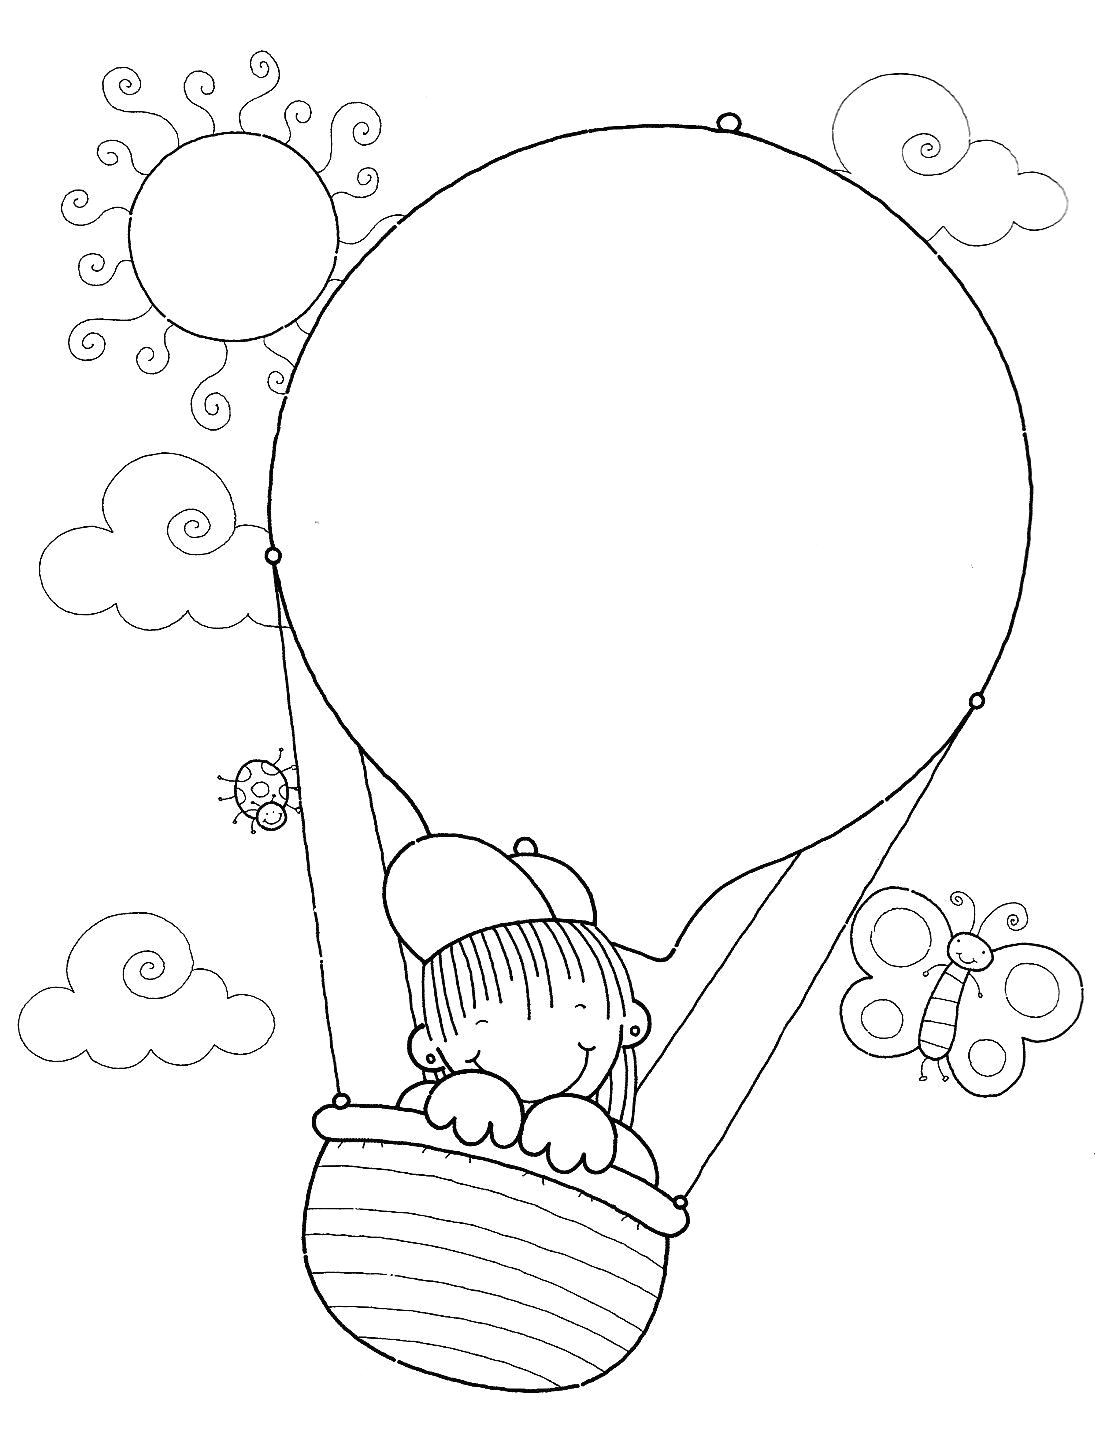 Drawing Cute Borders Pin by Elizabeth Pierson Meta On Coloring Coloring Pages School